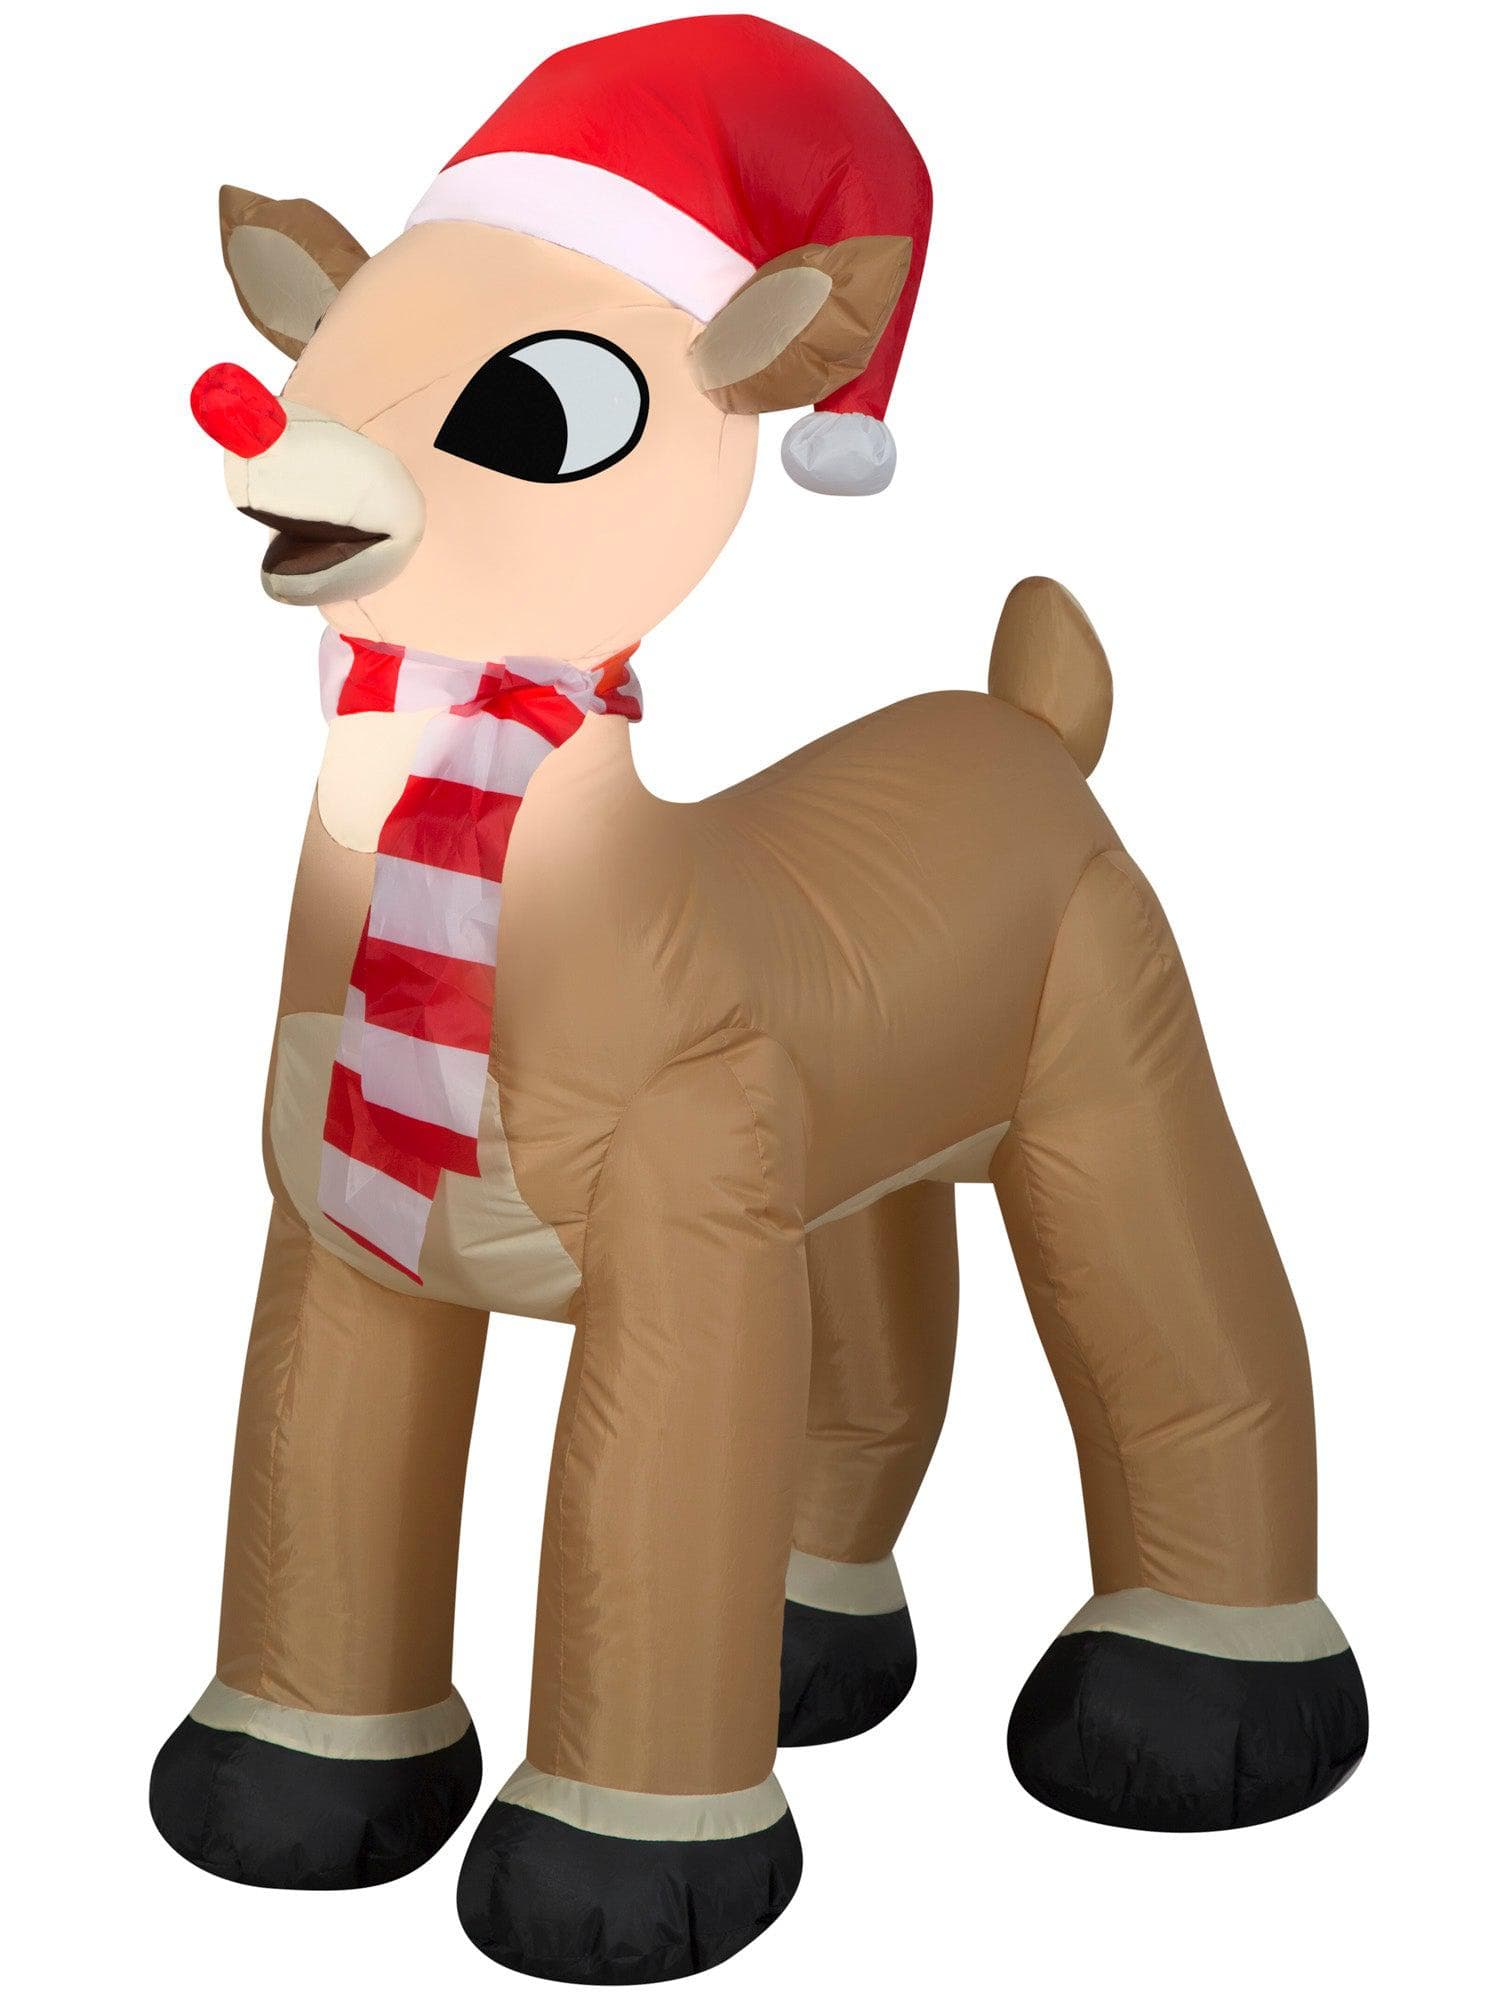 3.5 Foot Rudolph the Red-Nosed Reindeer Light Up Christmas Inflatable Lawn Decor - costumes.com